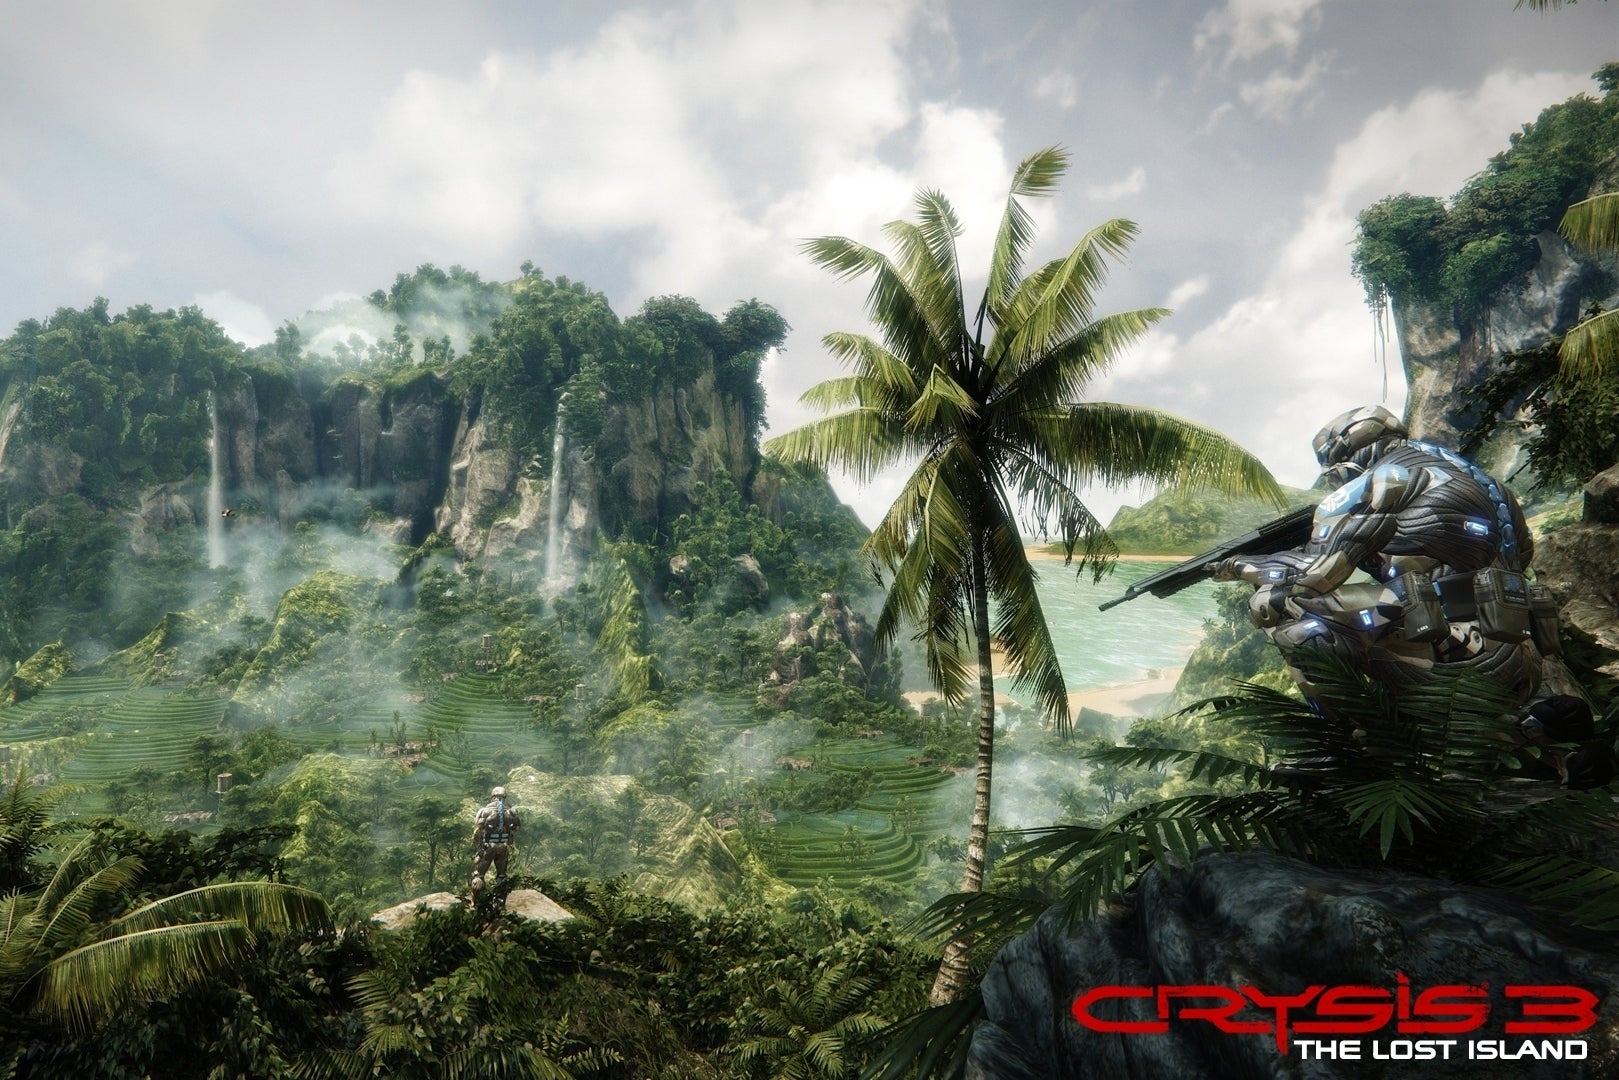 Image for Crysis 3 The Lost Island DLC returns series to its “spiritual roots”